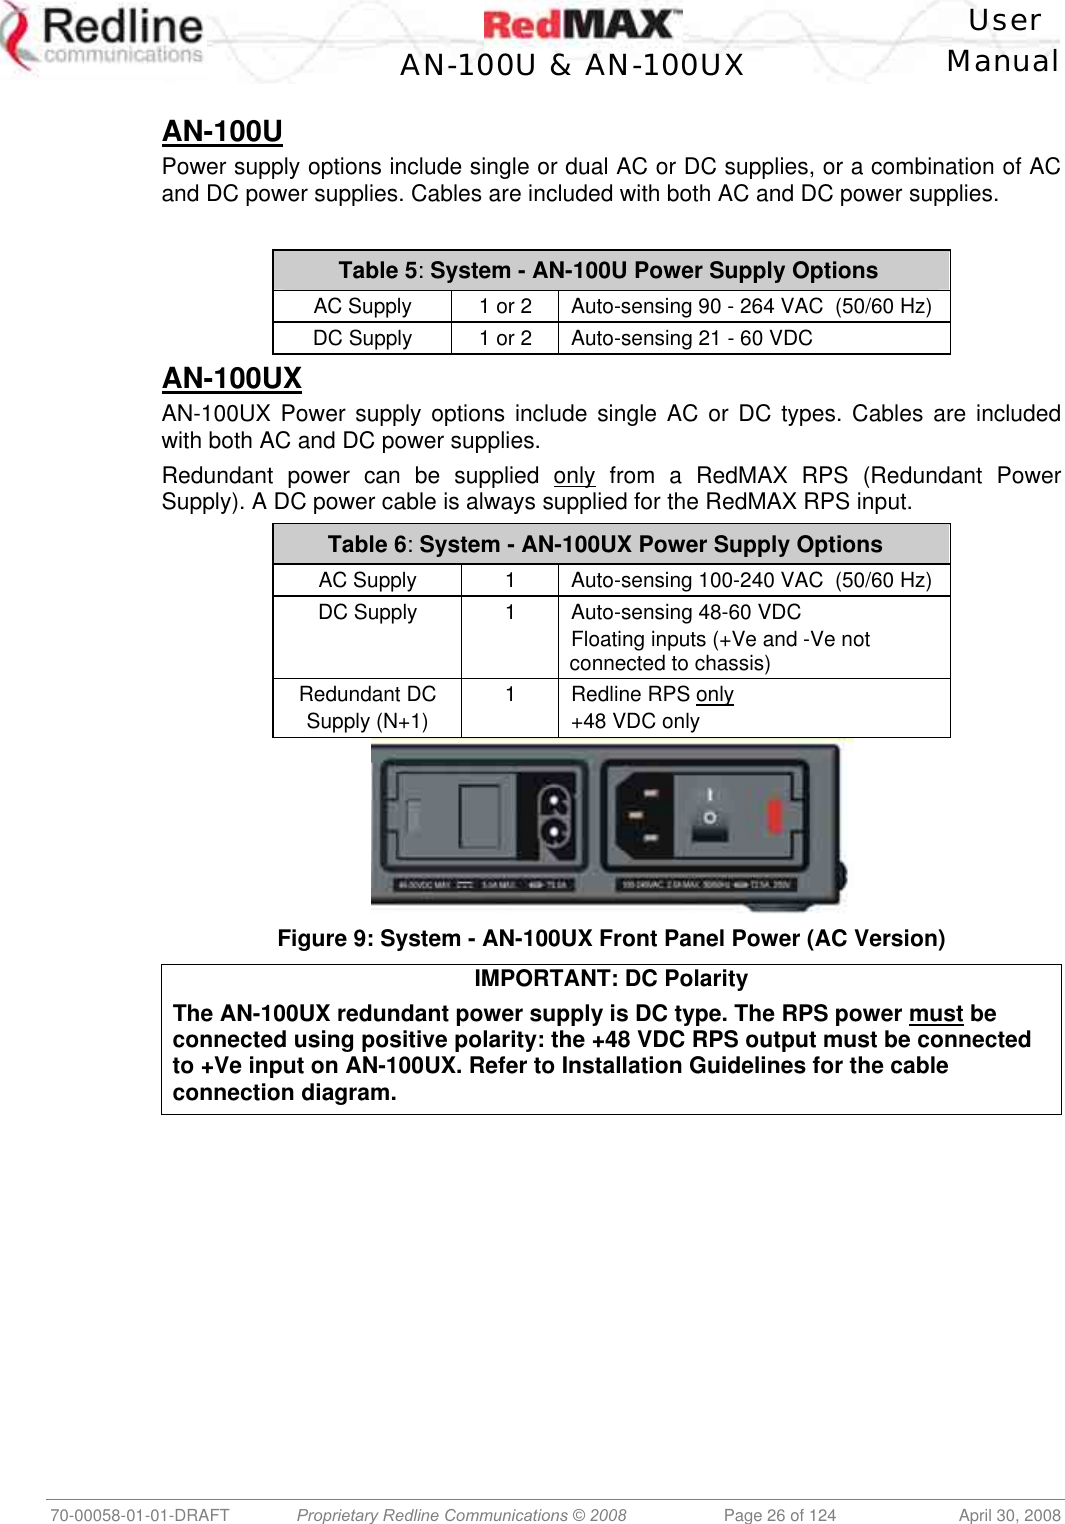    User  AN-100U &amp; AN-100UX Manual   70-00058-01-01-DRAFT  Proprietary Redline Communications © 2008   Page 26 of 124  April 30, 2008  AN-100U Power supply options include single or dual AC or DC supplies, or a combination of AC and DC power supplies. Cables are included with both AC and DC power supplies.   Table 5: System - AN-100U Power Supply Options AC Supply  1 or 2  Auto-sensing 90 - 264 VAC  (50/60 Hz) DC Supply  1 or 2  Auto-sensing 21 - 60 VDC AN-100UX AN-100UX Power supply options include single AC or DC types. Cables are included with both AC and DC power supplies. Redundant power can be supplied only from a RedMAX RPS (Redundant Power Supply). A DC power cable is always supplied for the RedMAX RPS input. Table 6: System - AN-100UX Power Supply Options AC Supply  1  Auto-sensing 100-240 VAC  (50/60 Hz) DC Supply  1  Auto-sensing 48-60 VDC Floating inputs (+Ve and -Ve not connected to chassis) Redundant DC Supply (N+1) 1 Redline RPS only +48 VDC only  Figure 9: System - AN-100UX Front Panel Power (AC Version) IMPORTANT: DC Polarity The AN-100UX redundant power supply is DC type. The RPS power must be connected using positive polarity: the +48 VDC RPS output must be connected to +Ve input on AN-100UX. Refer to Installation Guidelines for the cable connection diagram.  